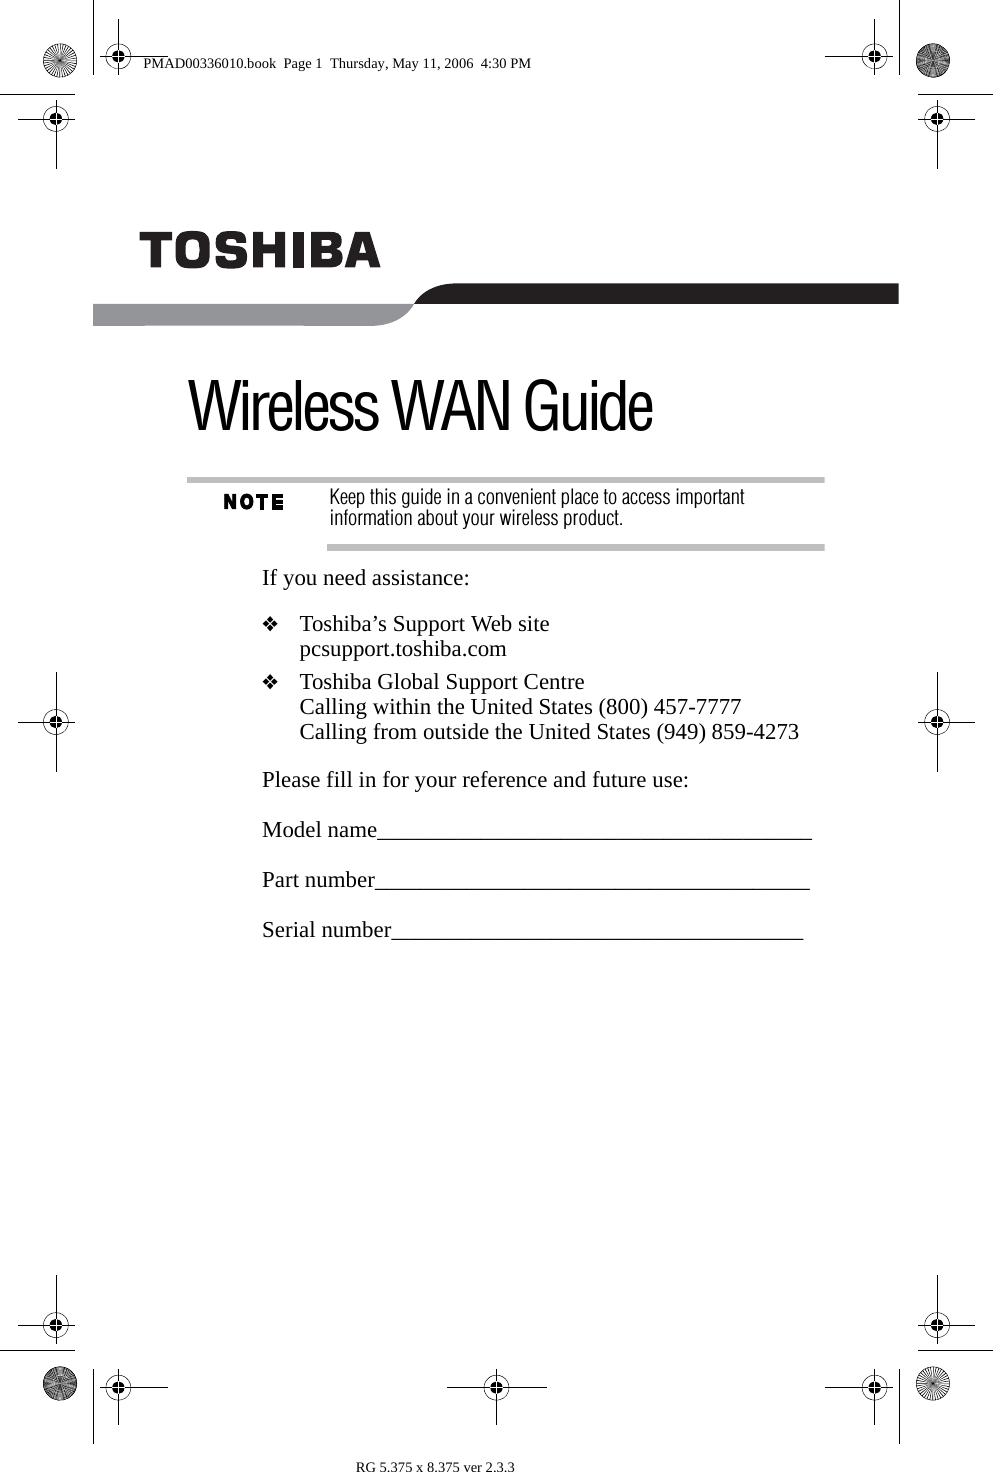 RG 5.375 x 8.375 ver 2.3.3Wireless WAN GuideKeep this guide in a convenient place to access important information about your wireless product.If you need assistance: ❖Toshiba’s Support Web sitepcsupport.toshiba.com❖Toshiba Global Support CentreCalling within the United States (800) 457-7777Calling from outside the United States (949) 859-4273 Please fill in for your reference and future use:Model name______________________________________Part number______________________________________Serial number____________________________________PMAD00336010.book  Page 1  Thursday, May 11, 2006  4:30 PM